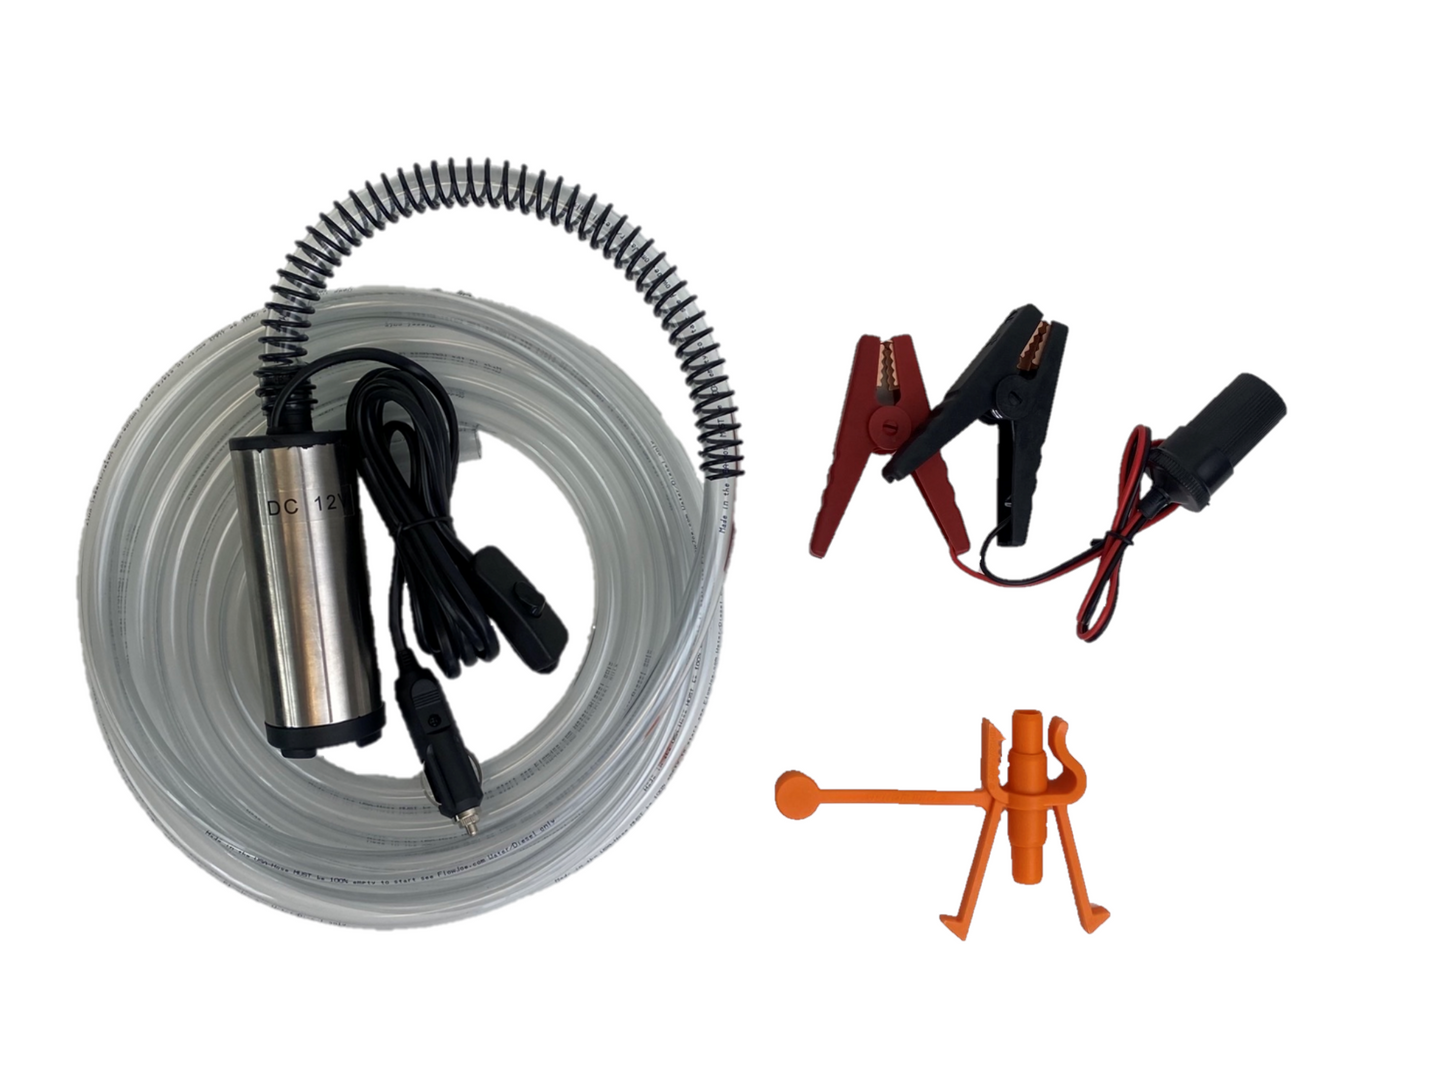 FlowJoe sinker submersible fuel transfer unit parts including hoseman and pump with alligator clip